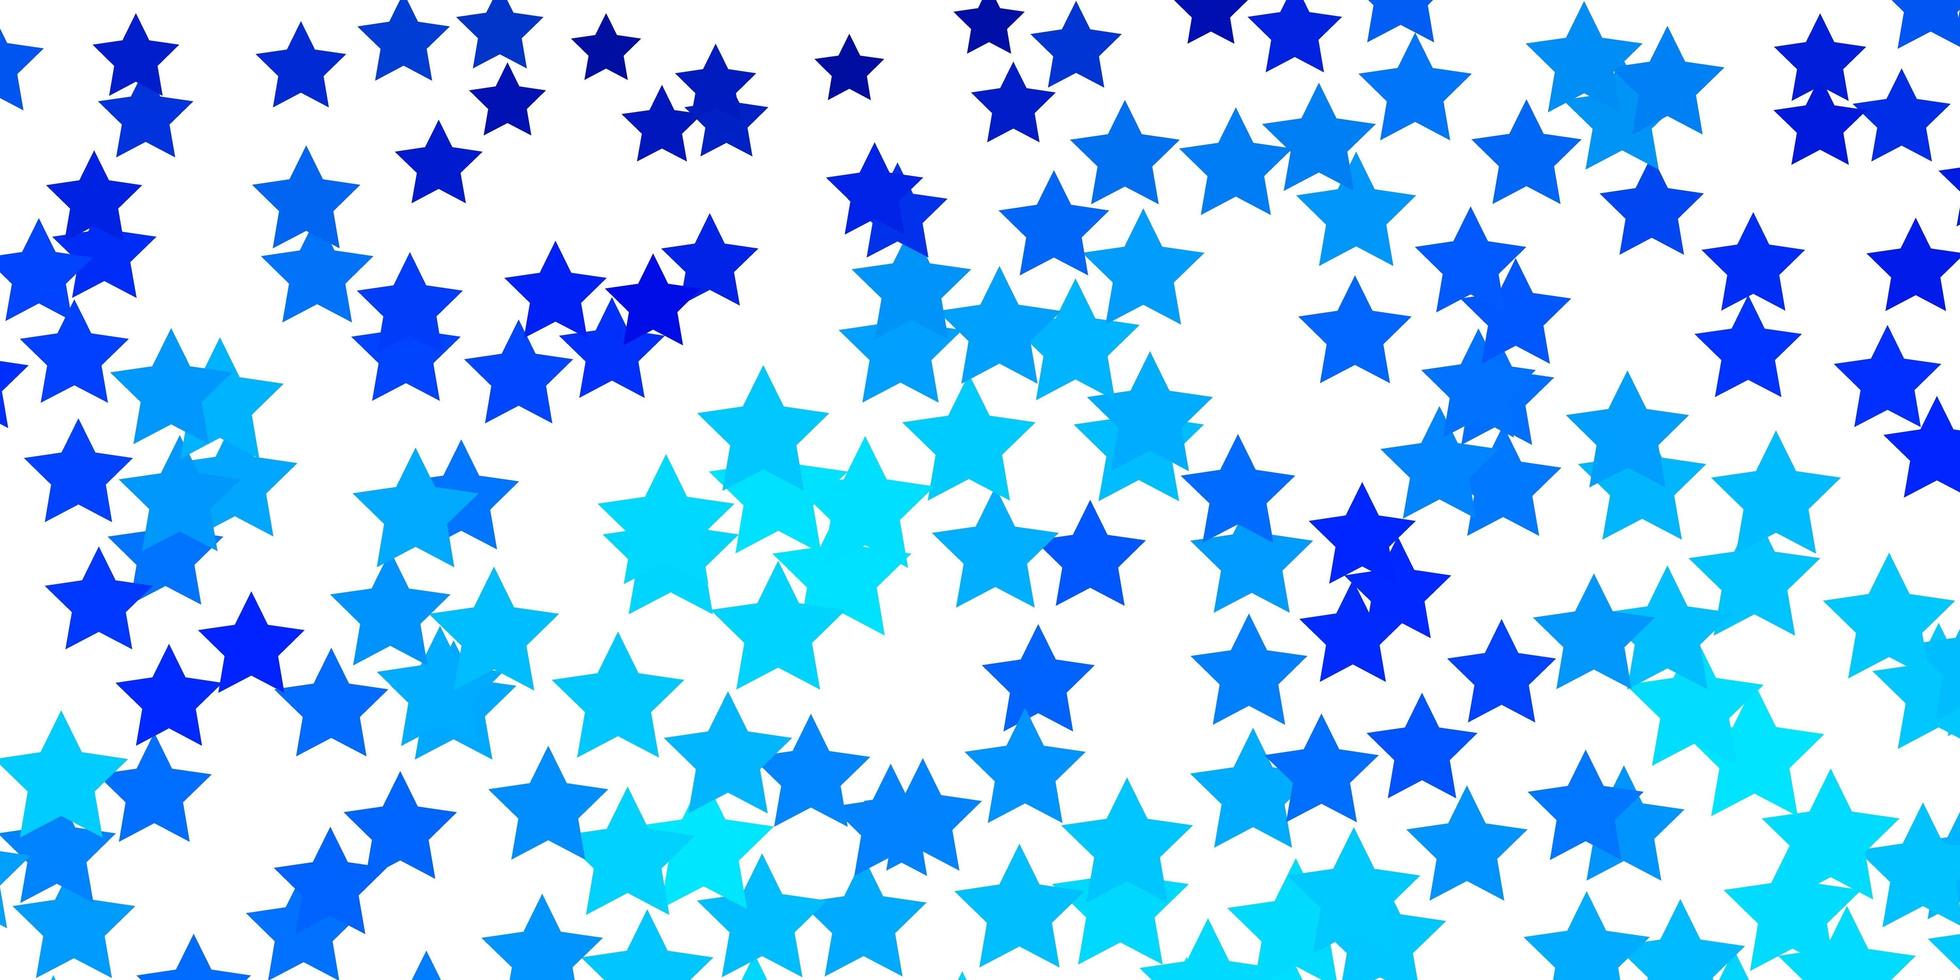 Light BLUE vector layout with bright stars. Decorative illustration with stars on abstract template. Best design for your ad, poster, banner.